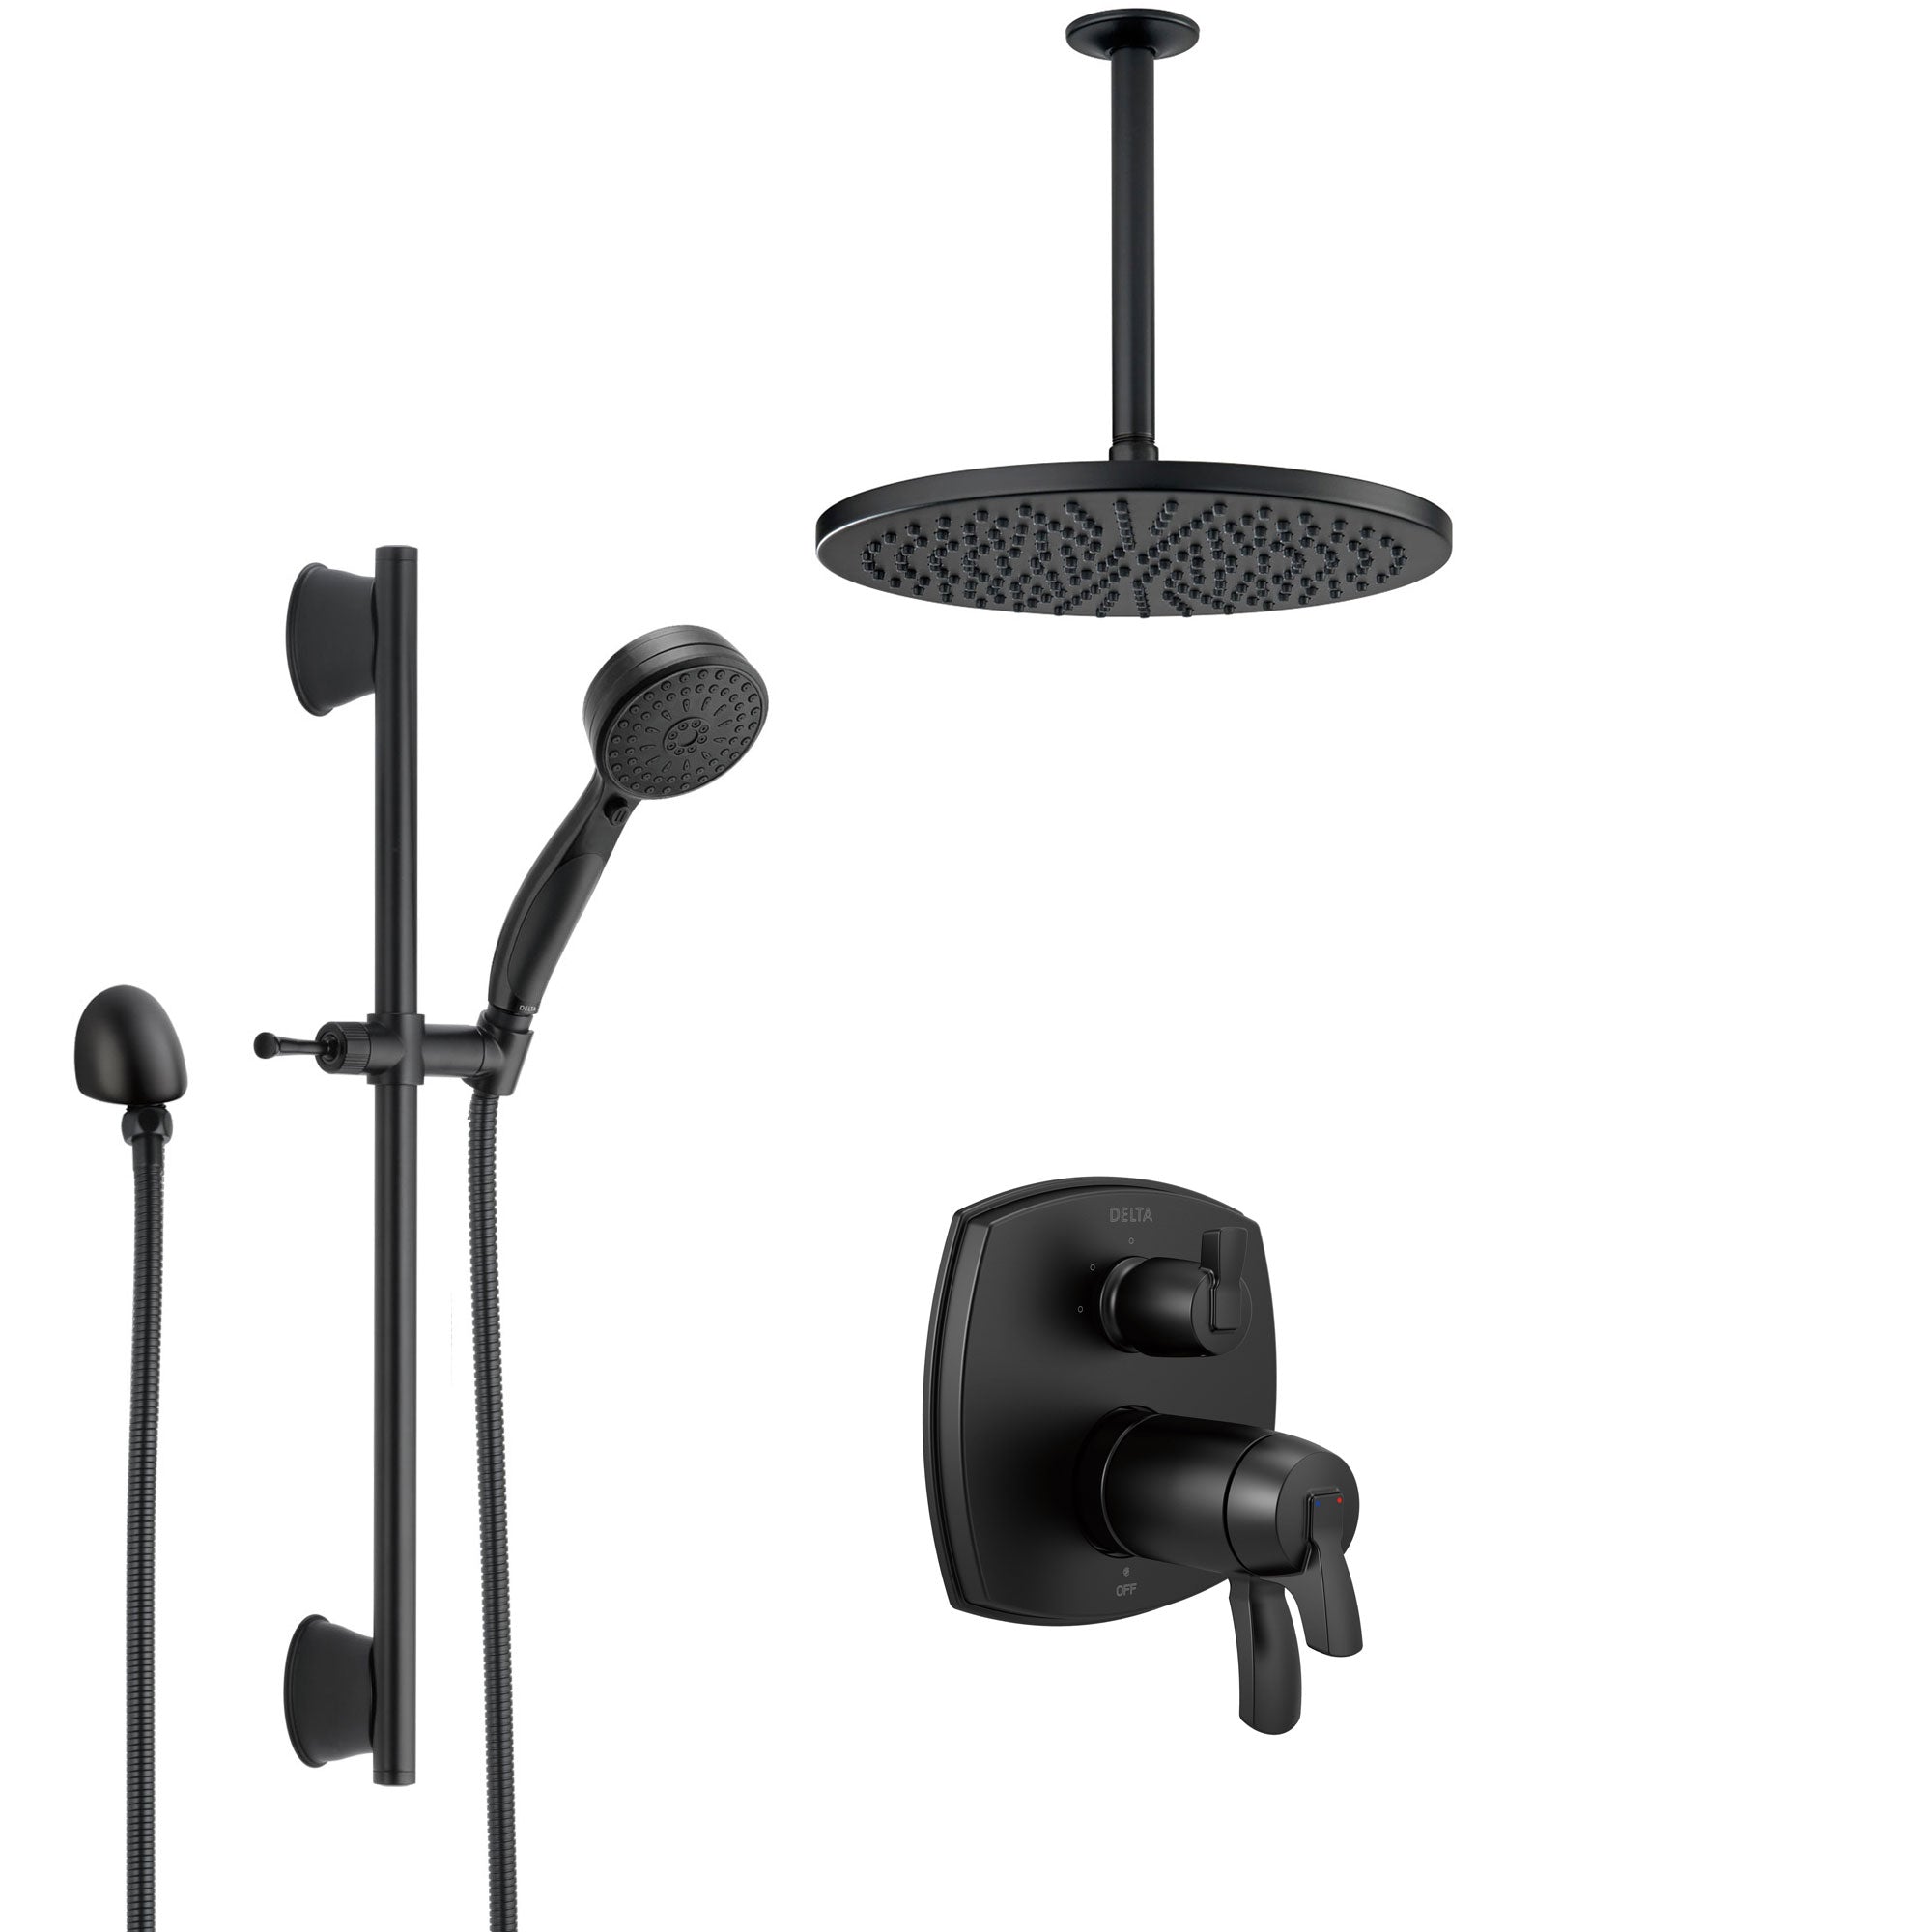 Delta Stryke Matte Black Thermostatic Shower System with Integrated Diverter, Large Round Ceiling Showerhead and Hand Spray on Slidebar SS27T876BLL2